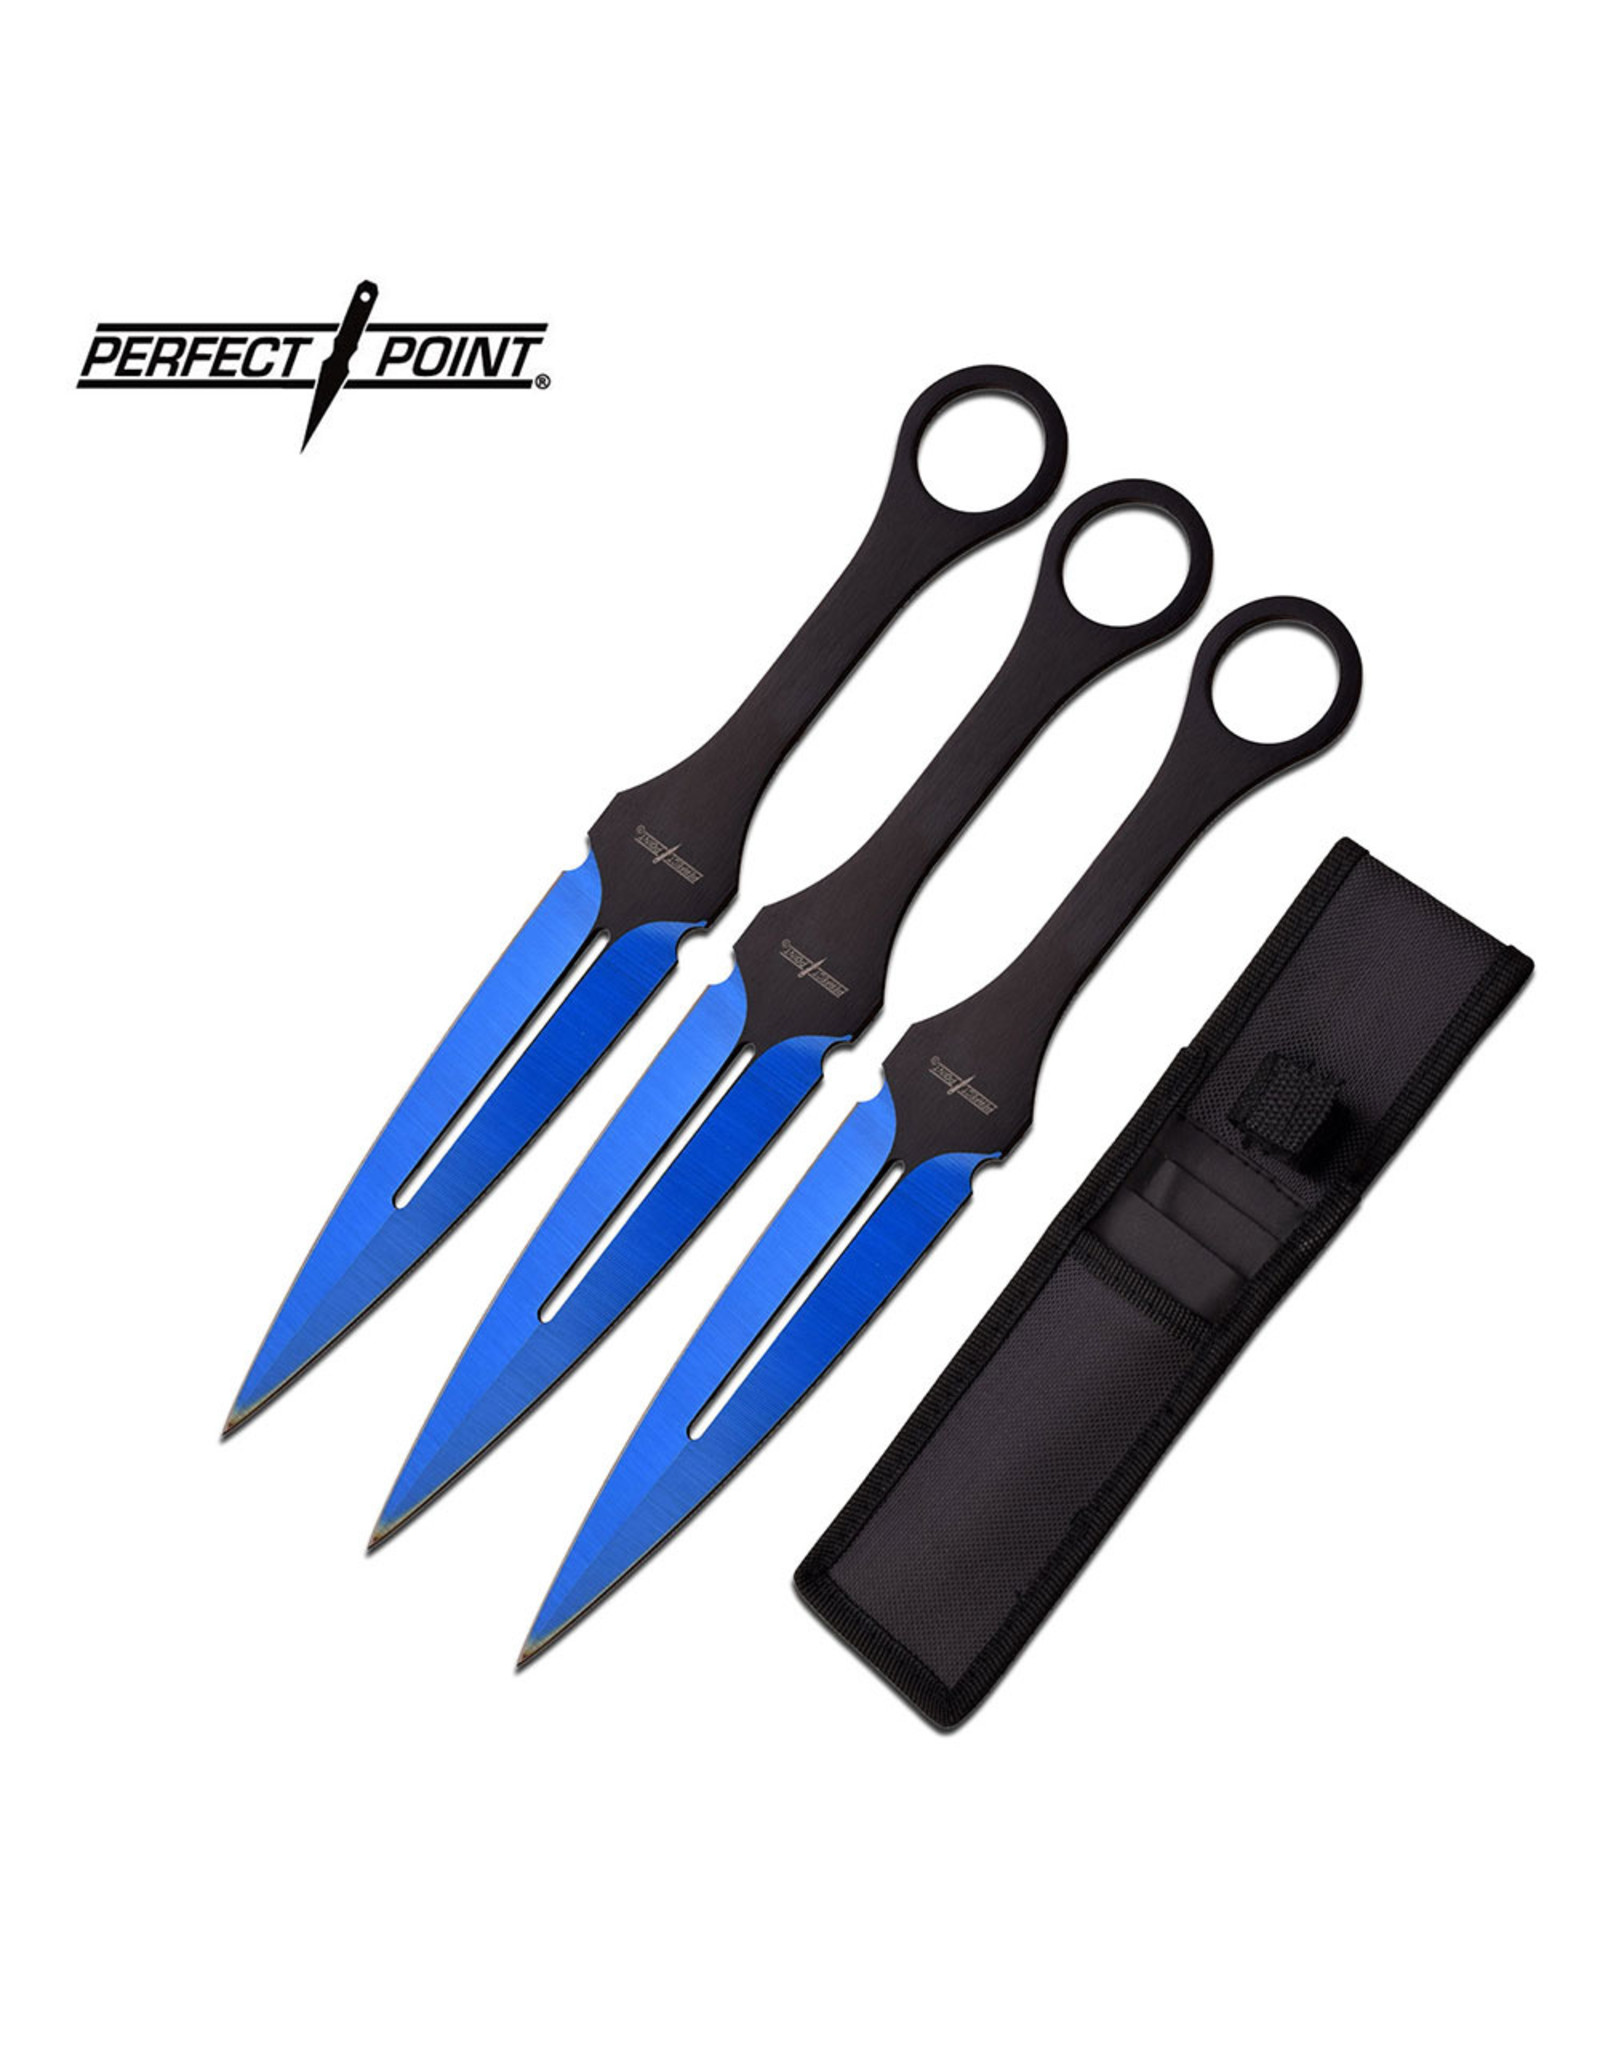 Perfect Point PERFECT POINT PP-105BL-7-3 THROWING KNIFE 3PC SET 7" OVERALL